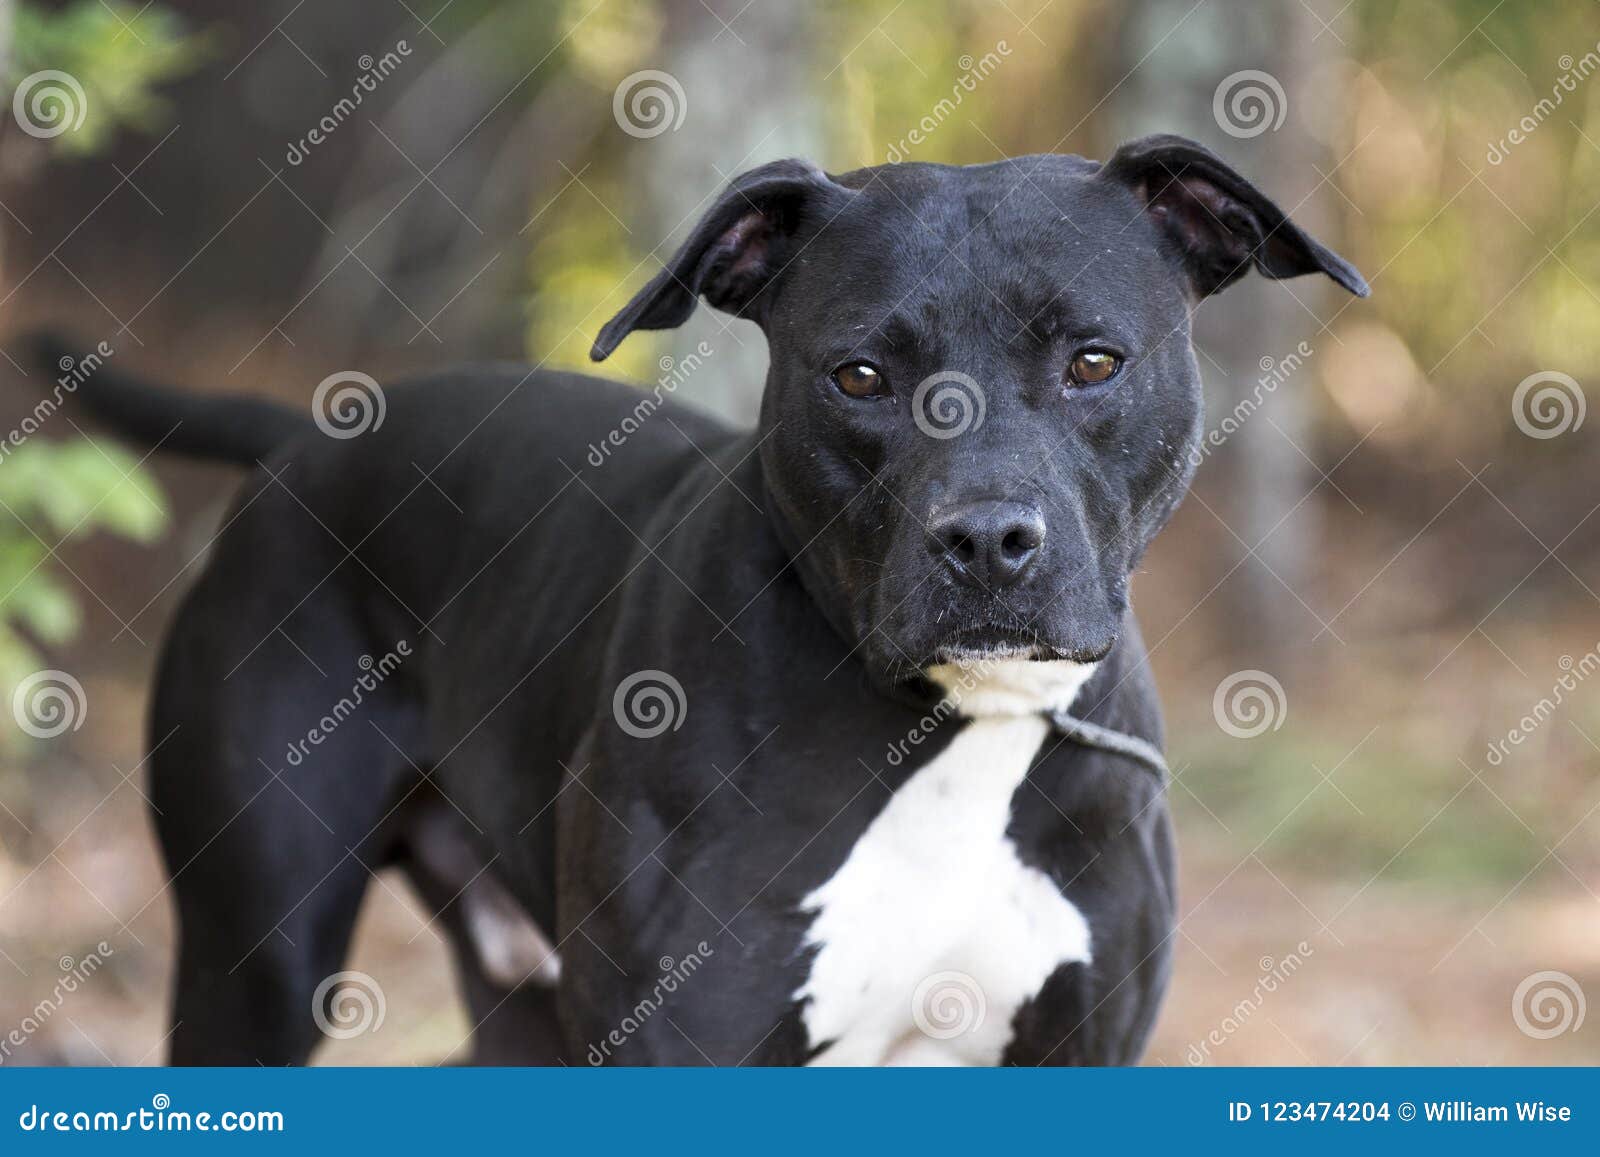 pitbull mixed with terrier